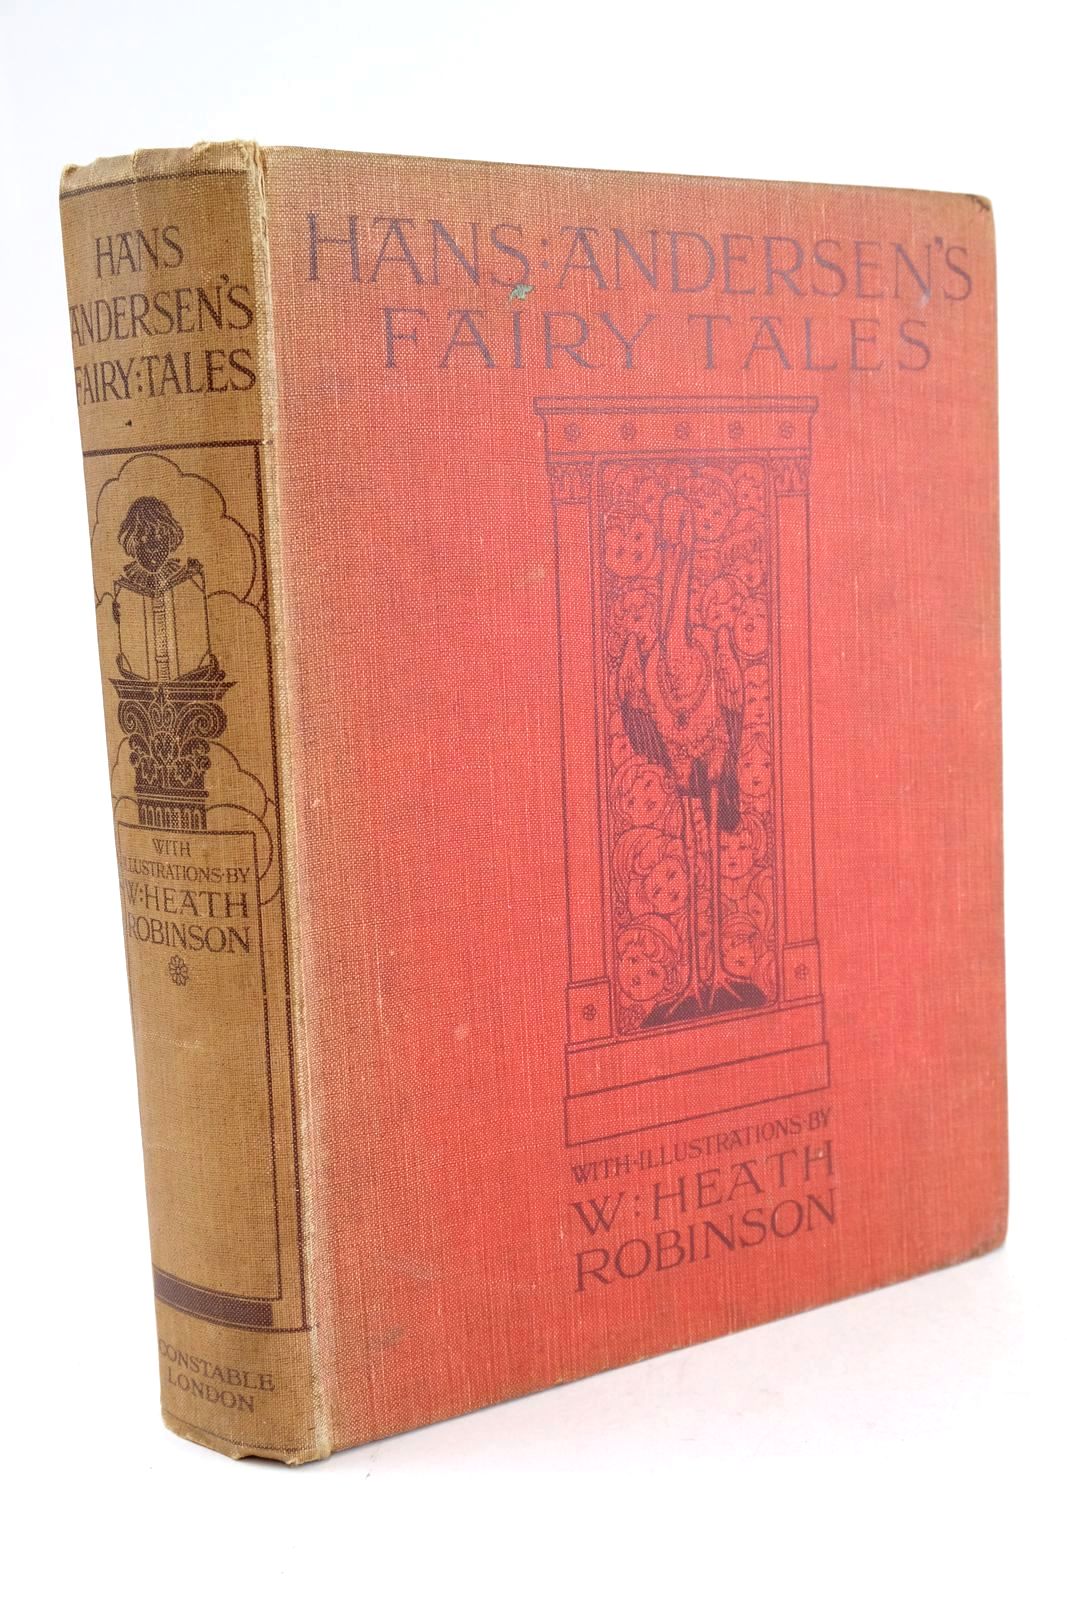 Photo of HANS ANDERSEN'S FAIRY TALES written by Andersen, Hans Christian illustrated by Robinson, W. Heath published by Constable & Co. Ltd. (STOCK CODE: 1325108)  for sale by Stella & Rose's Books